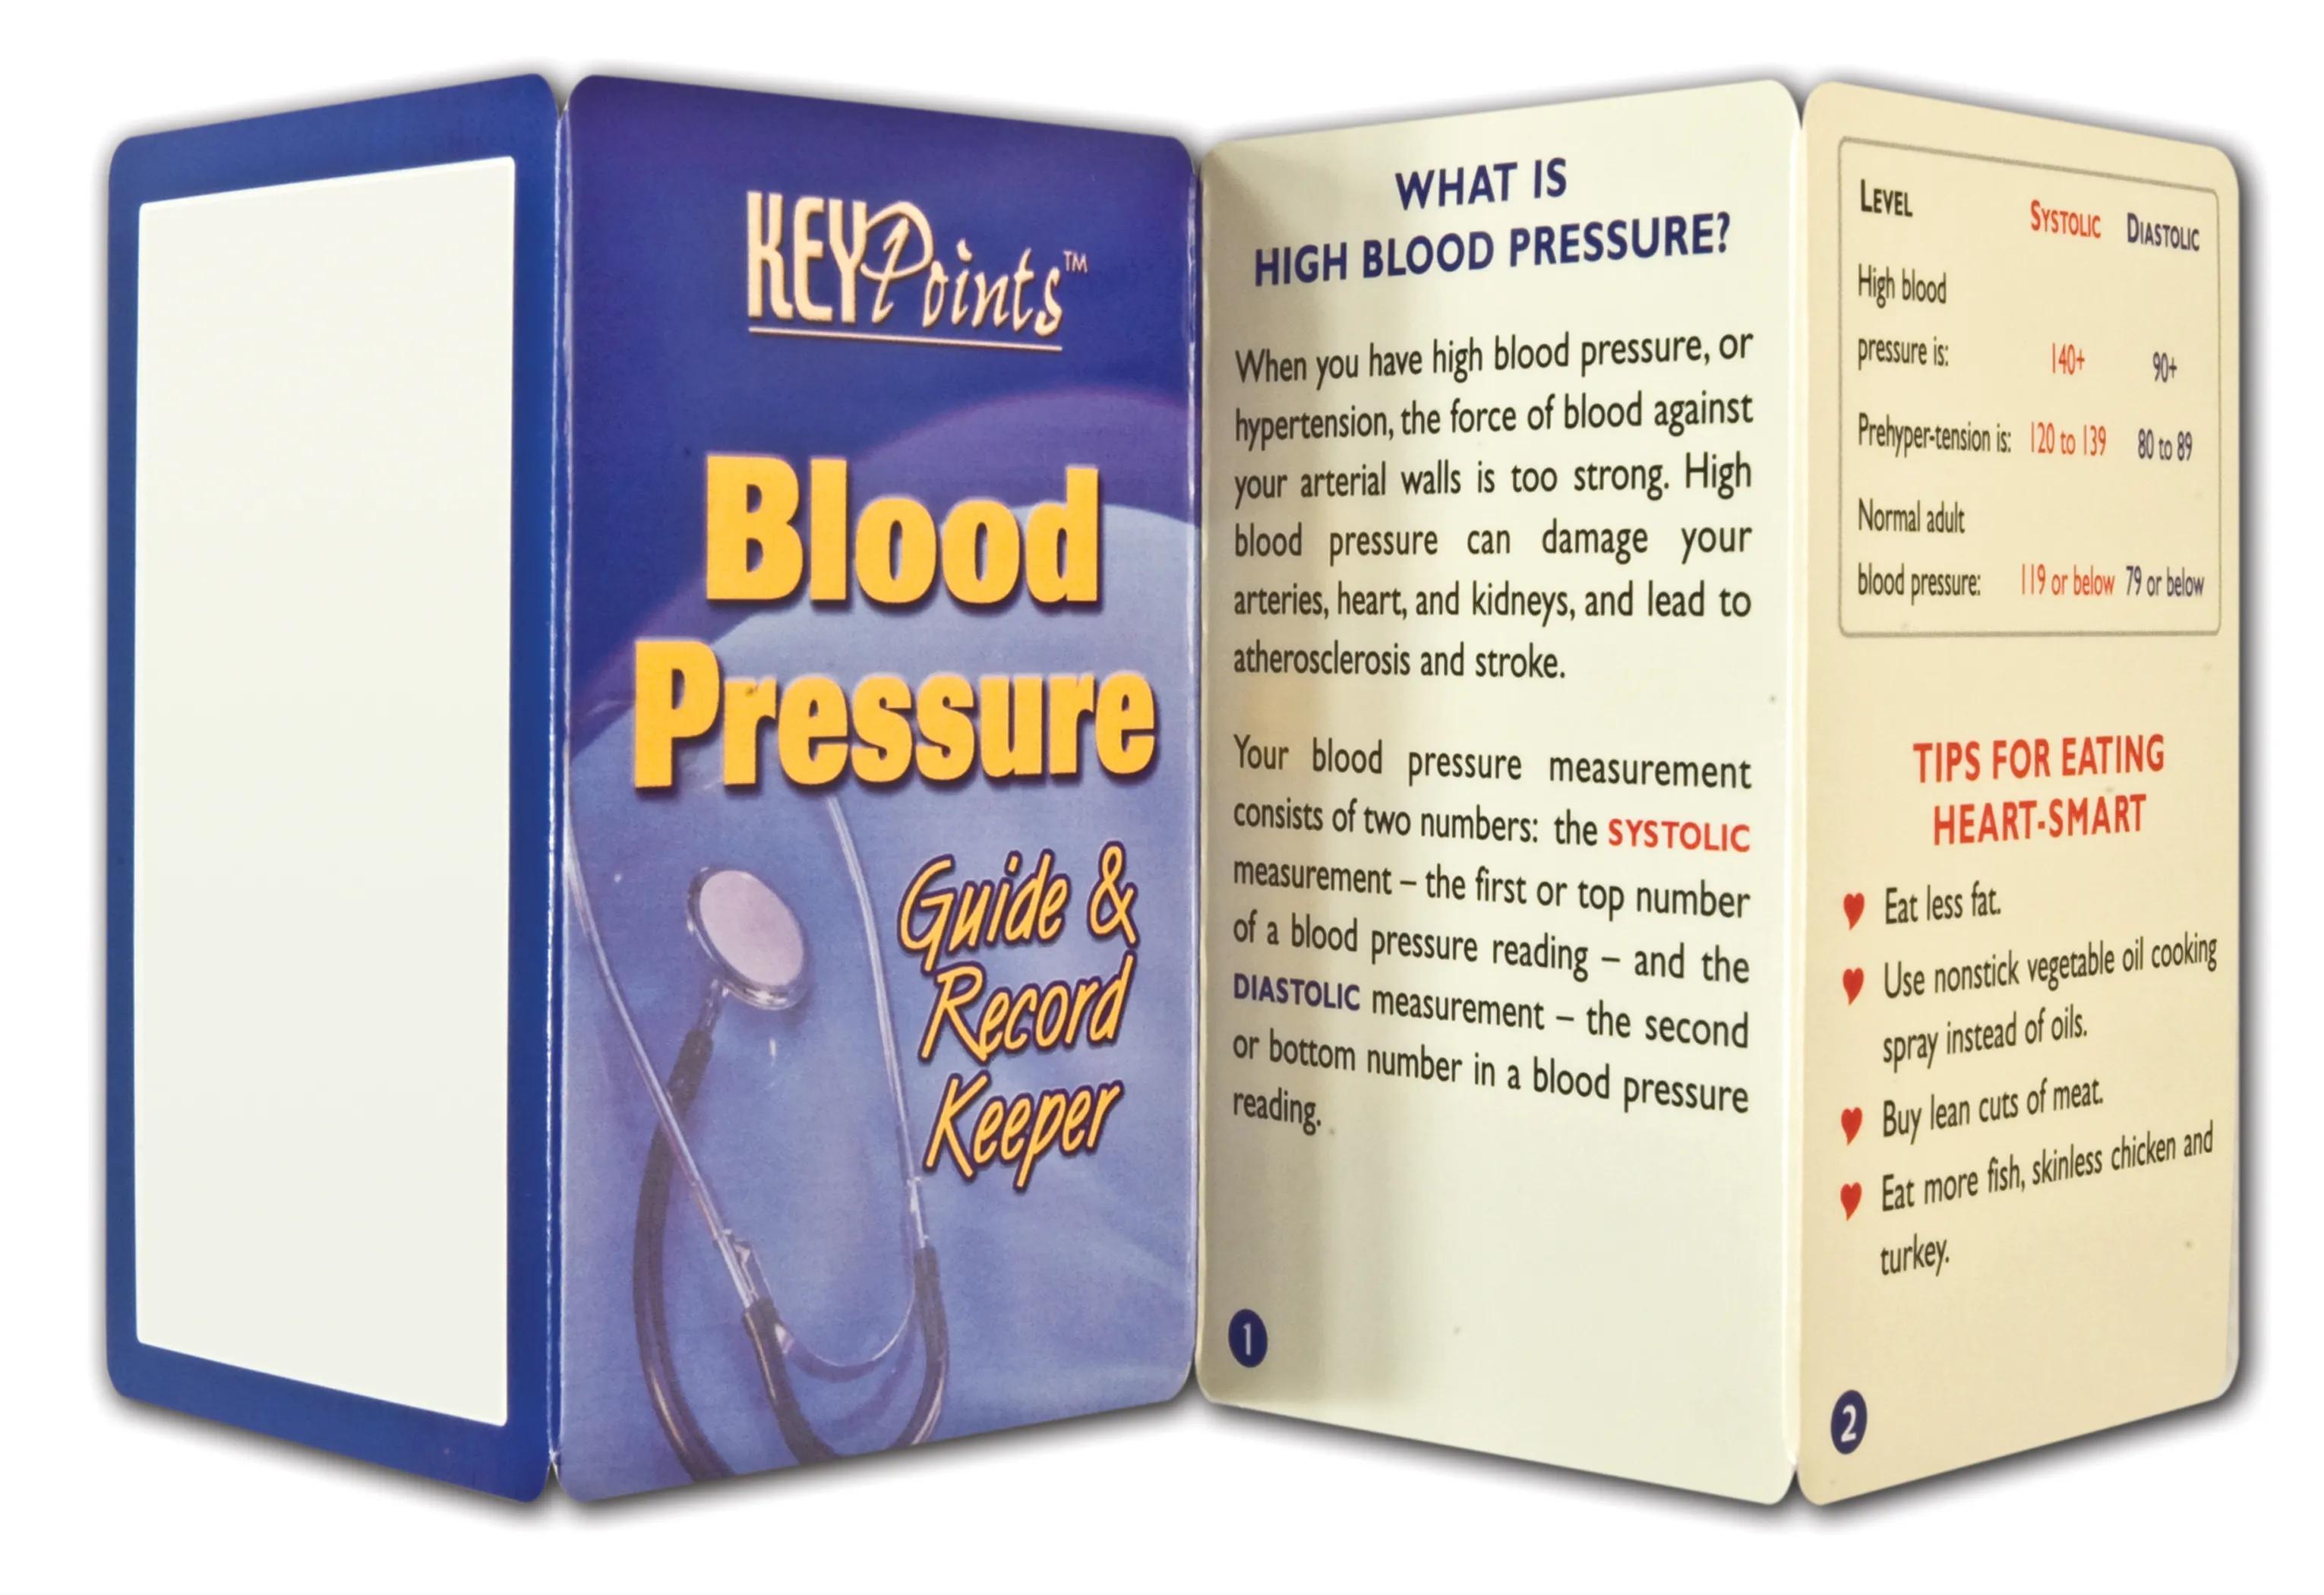 Key Point: Blood Pressure - Guide & Record Keeper 1 of 6